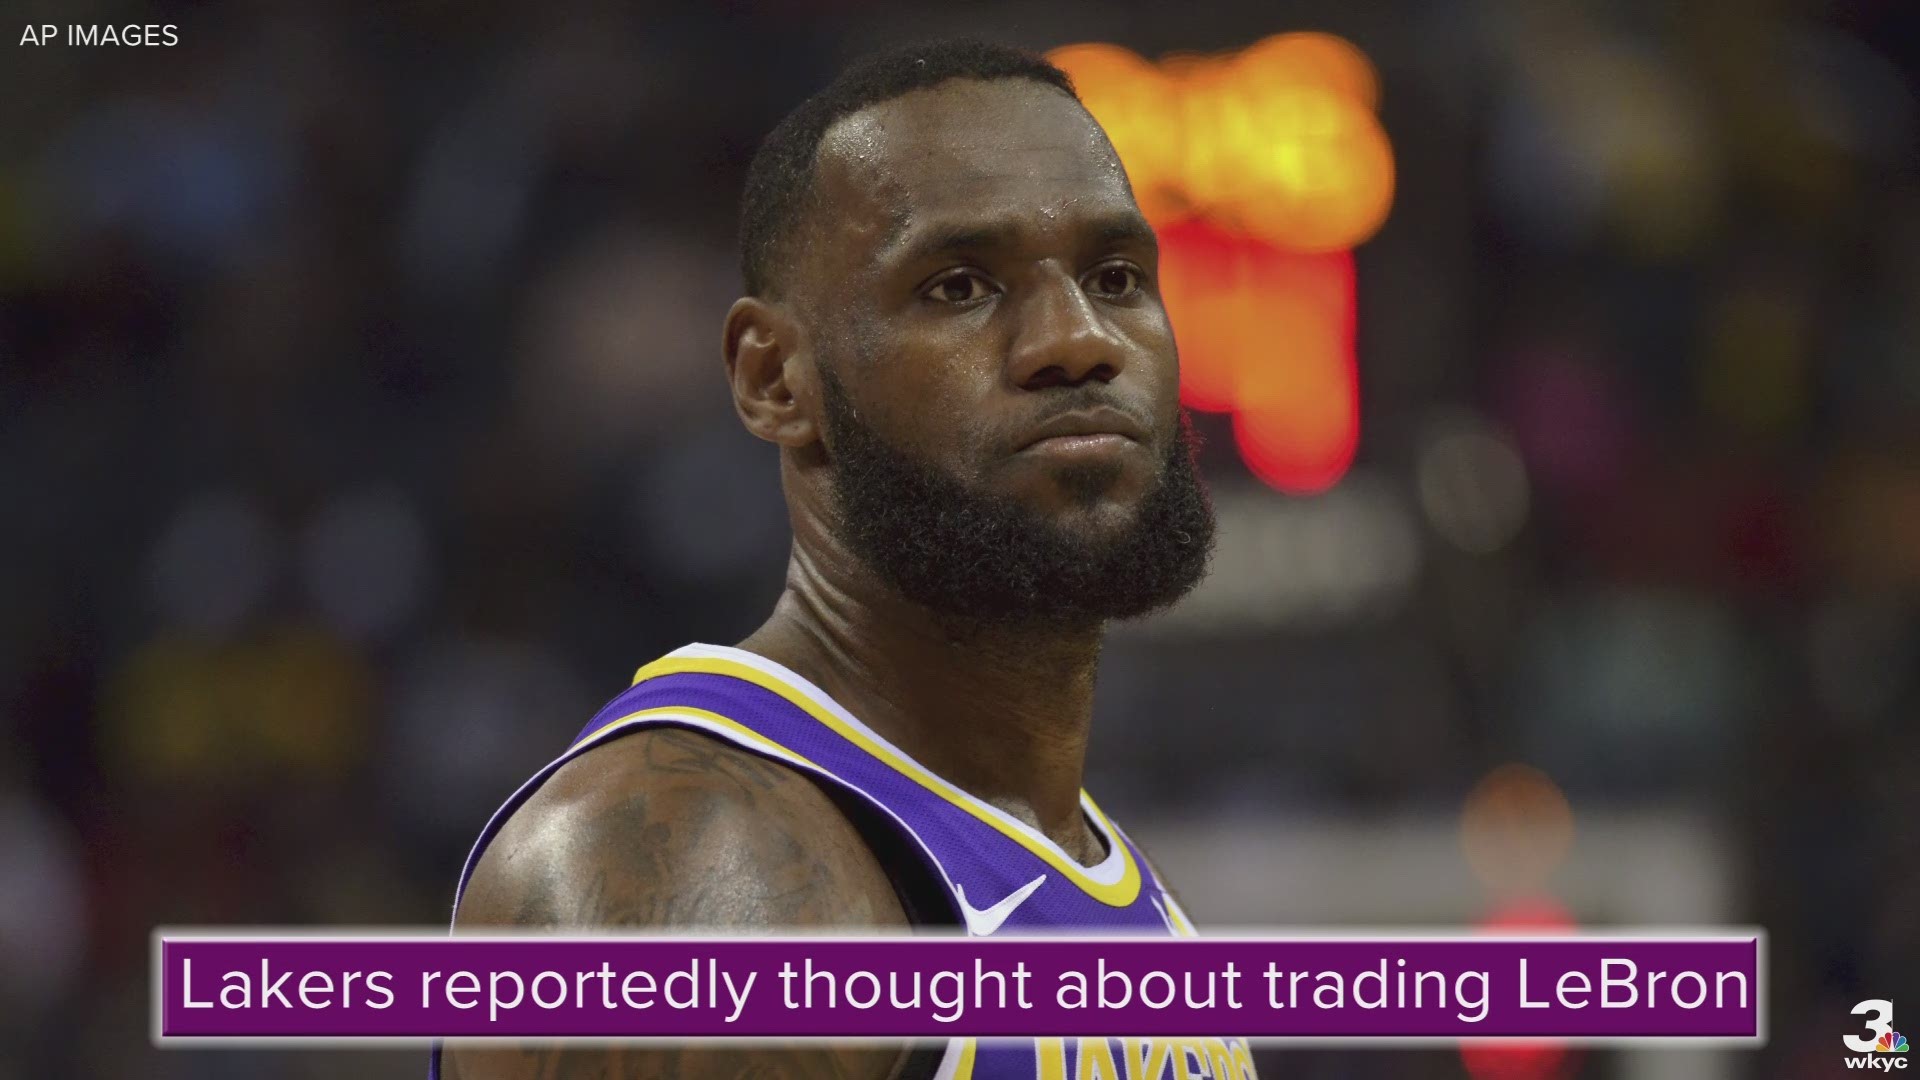 According to Ric Bucher of Bleacher Report, the Los Angeles Lakers briefly considered trading LeBron James last month.